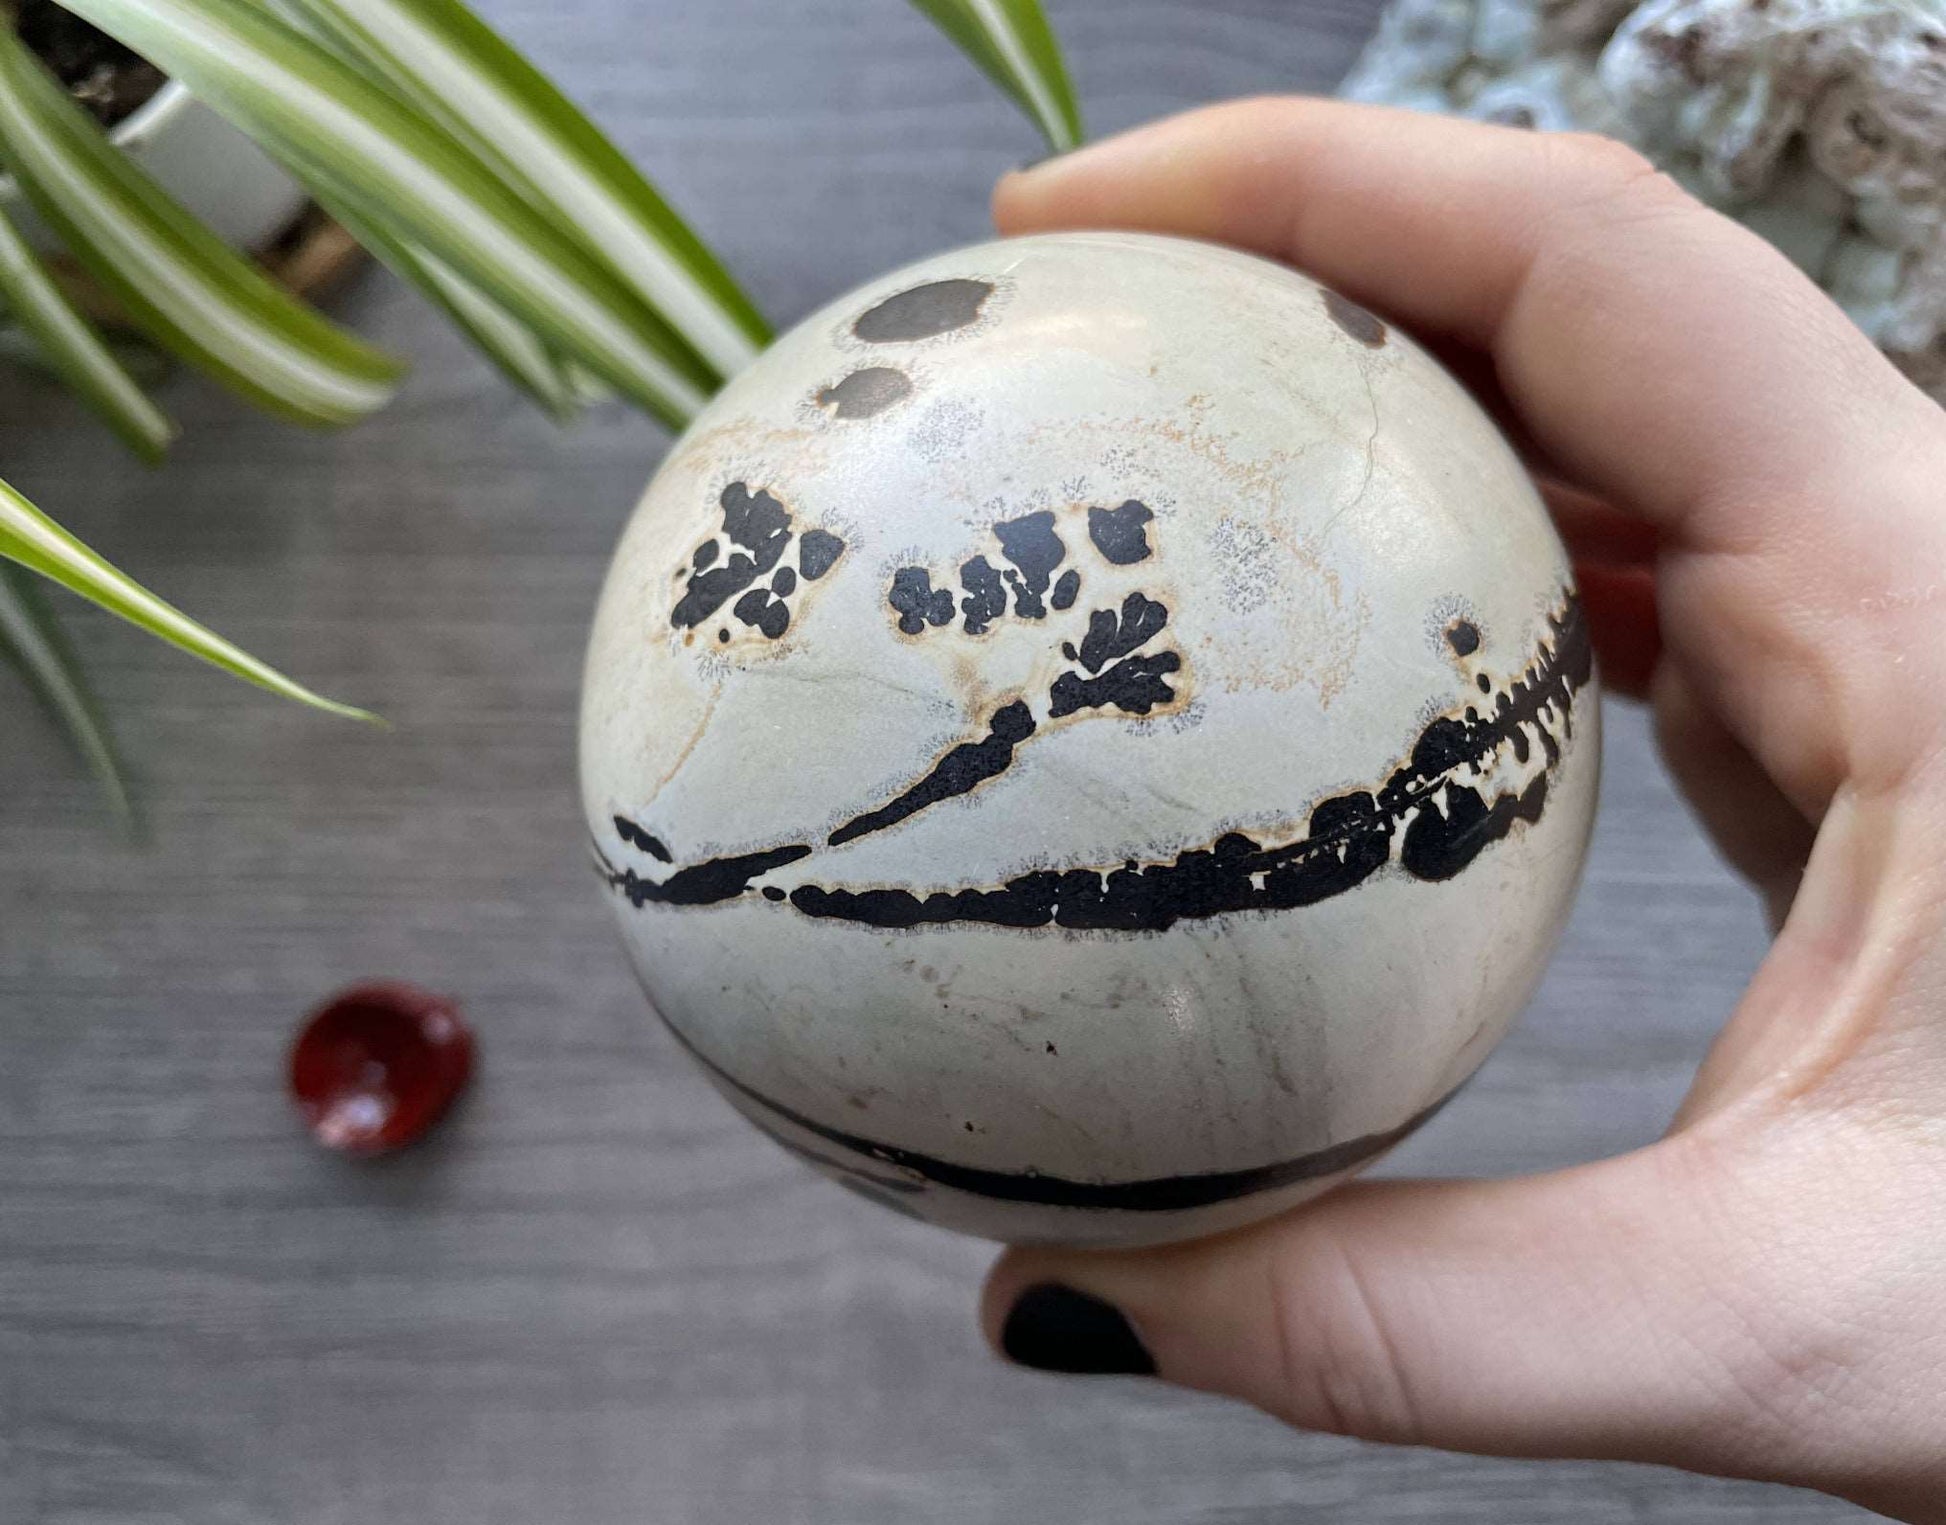 Pictured is a sphere carved out of Chinese painting stone.